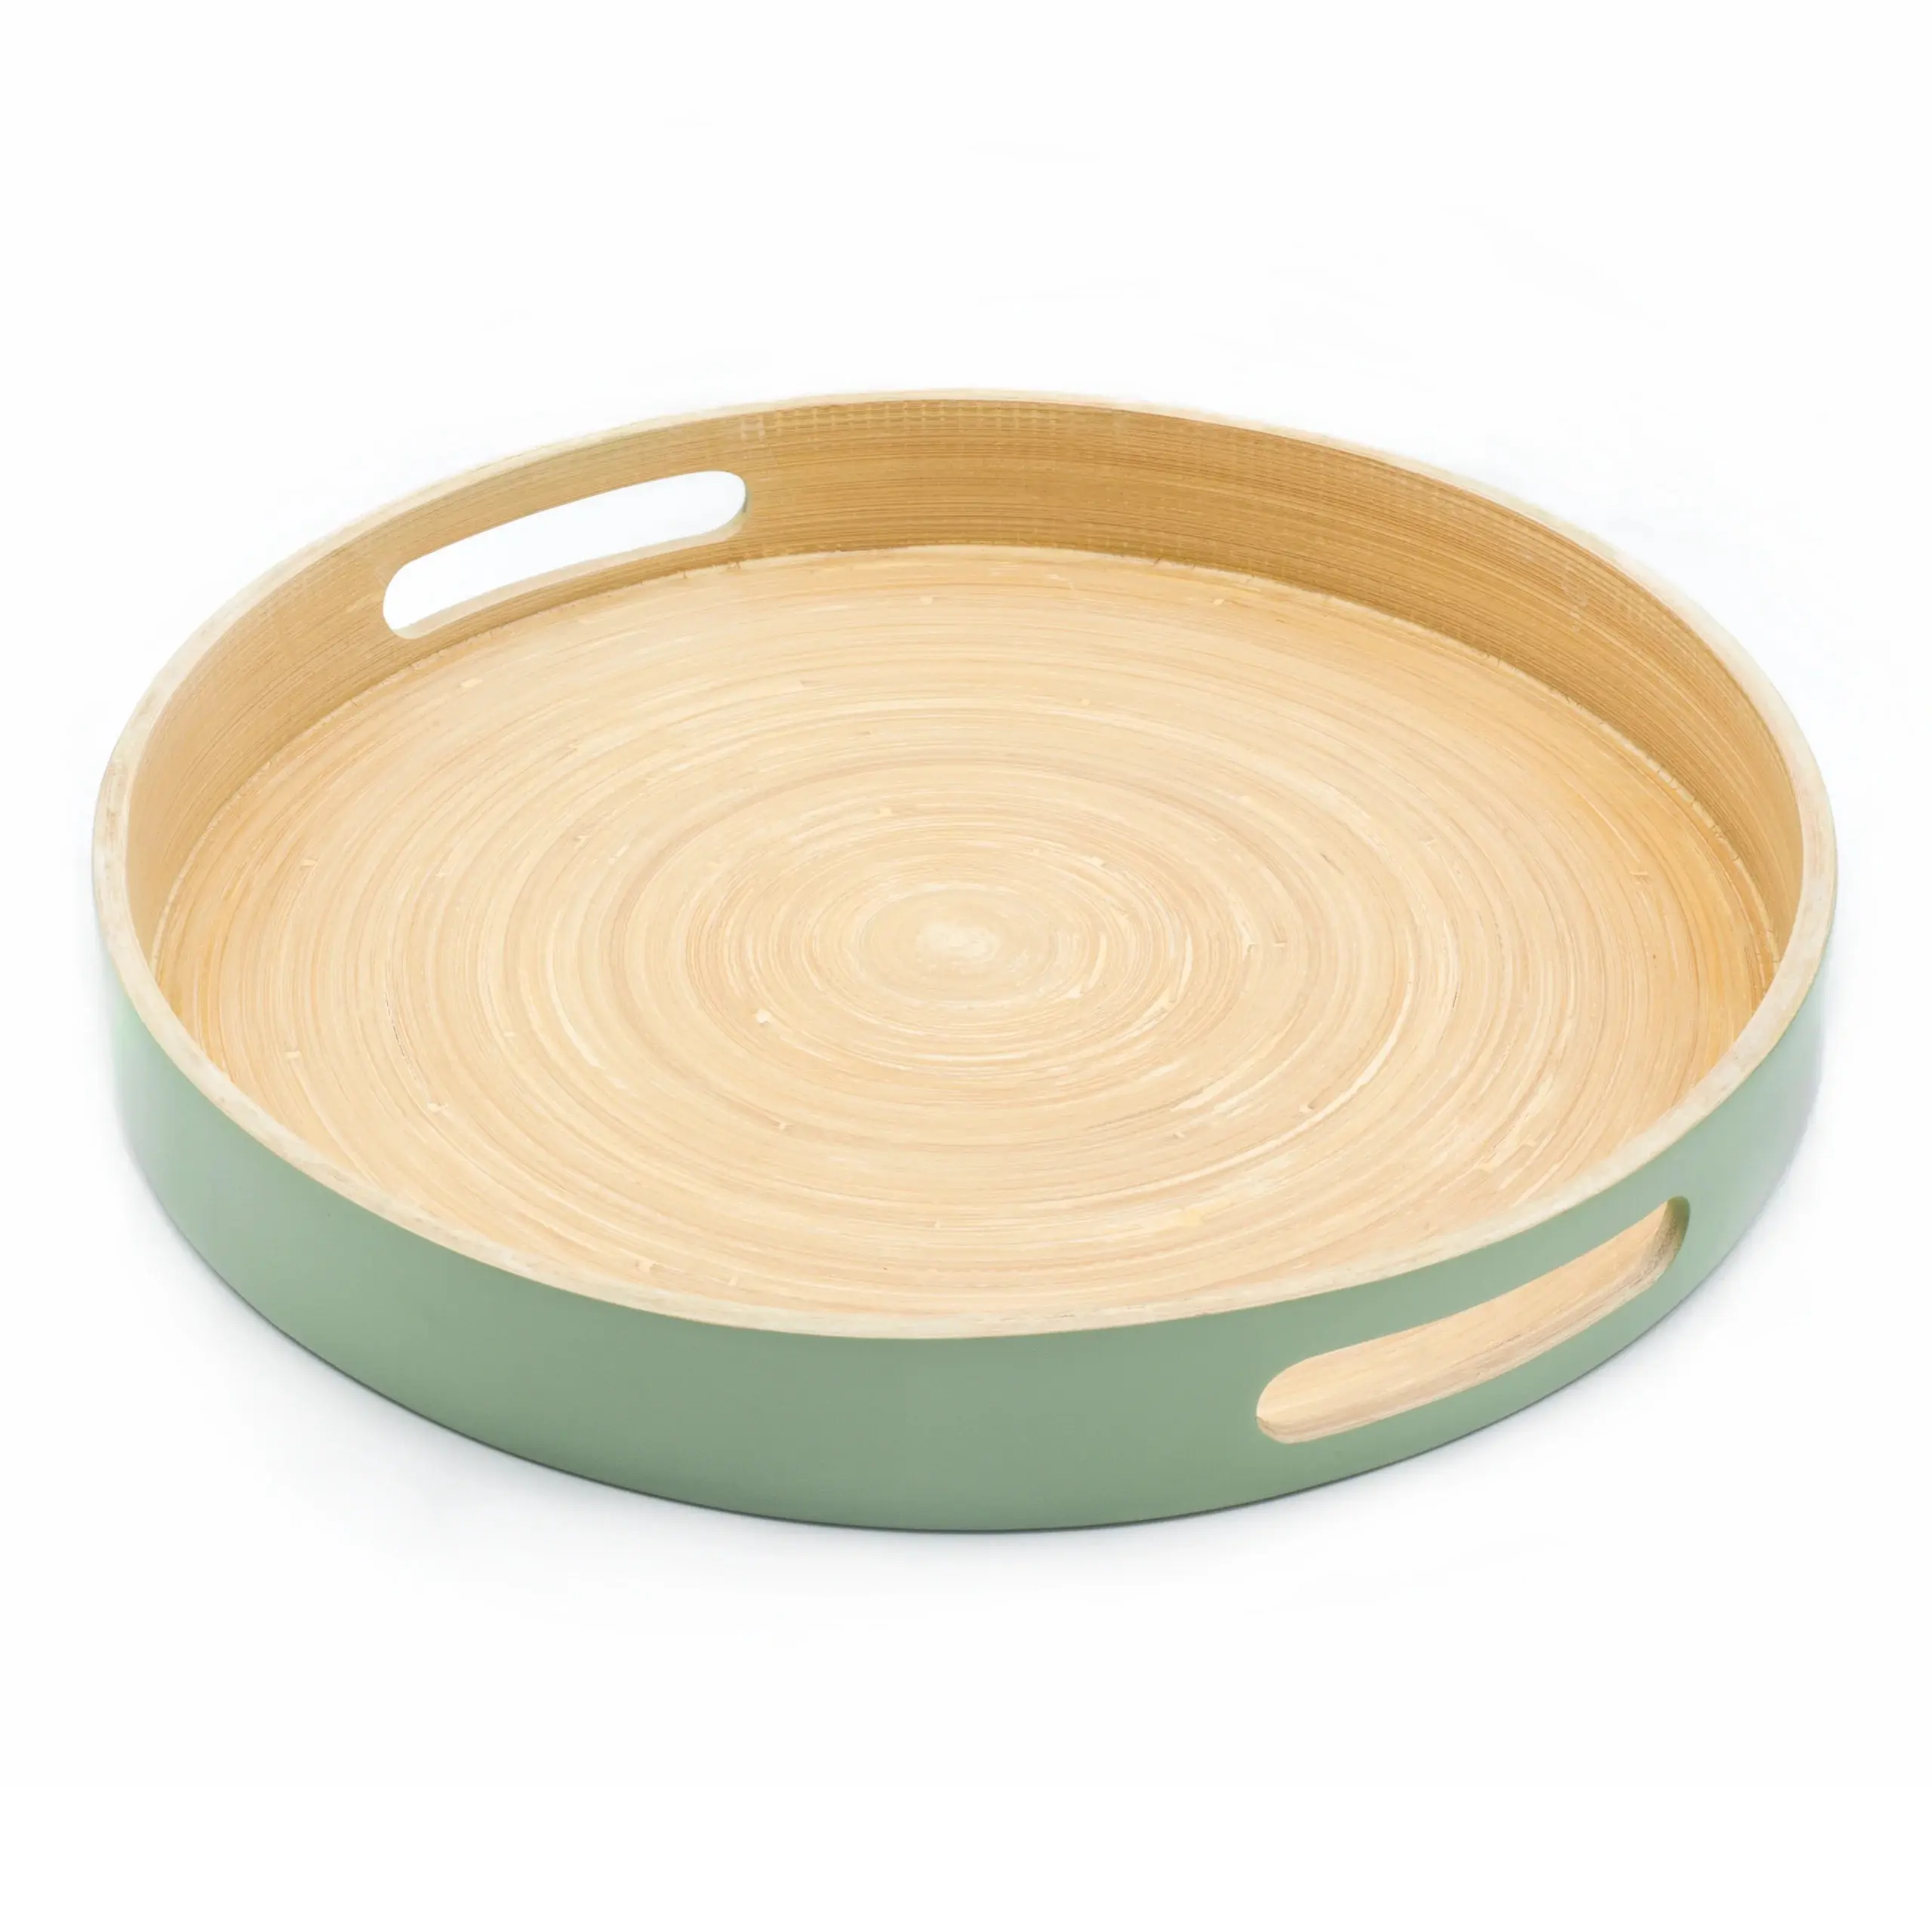 Top 1 supplier in Vietnam factory Colorful Spun Bamboo Serving Tray For Home - Whosale in bulk